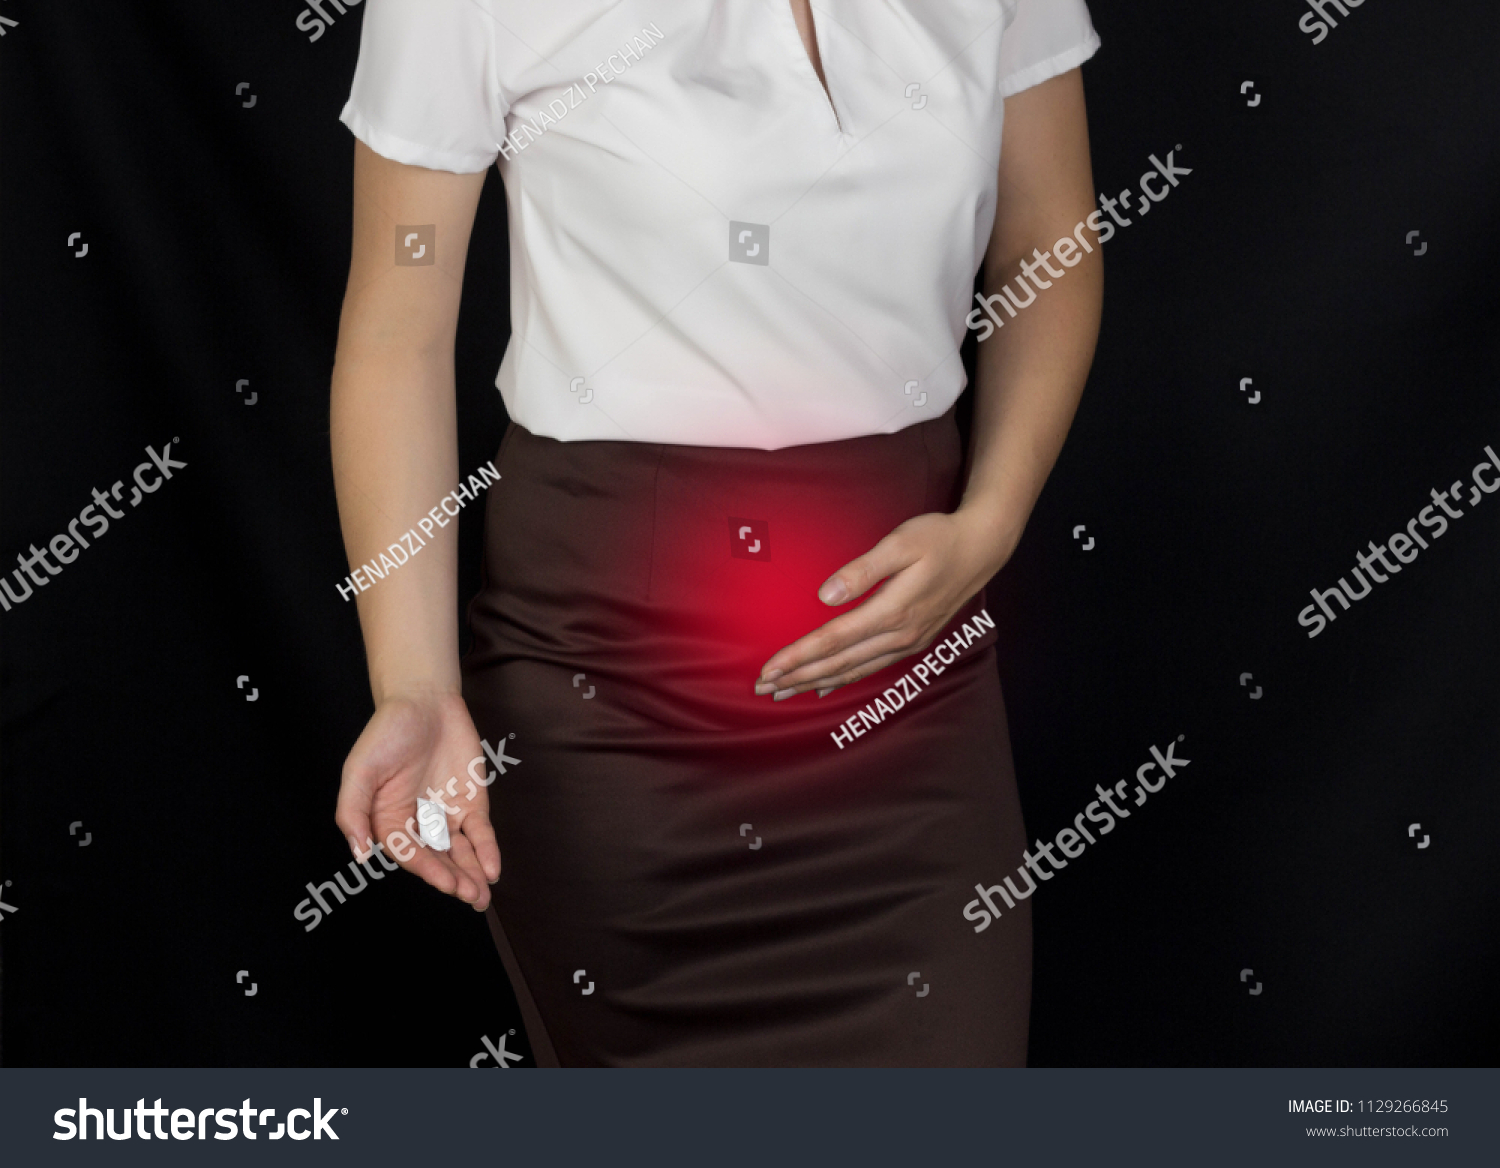 Stock Photo The Girl Holds On To The Lower Abdomen Smells And Holds In Her Hand Suppository Sexual Infection 1129266845 